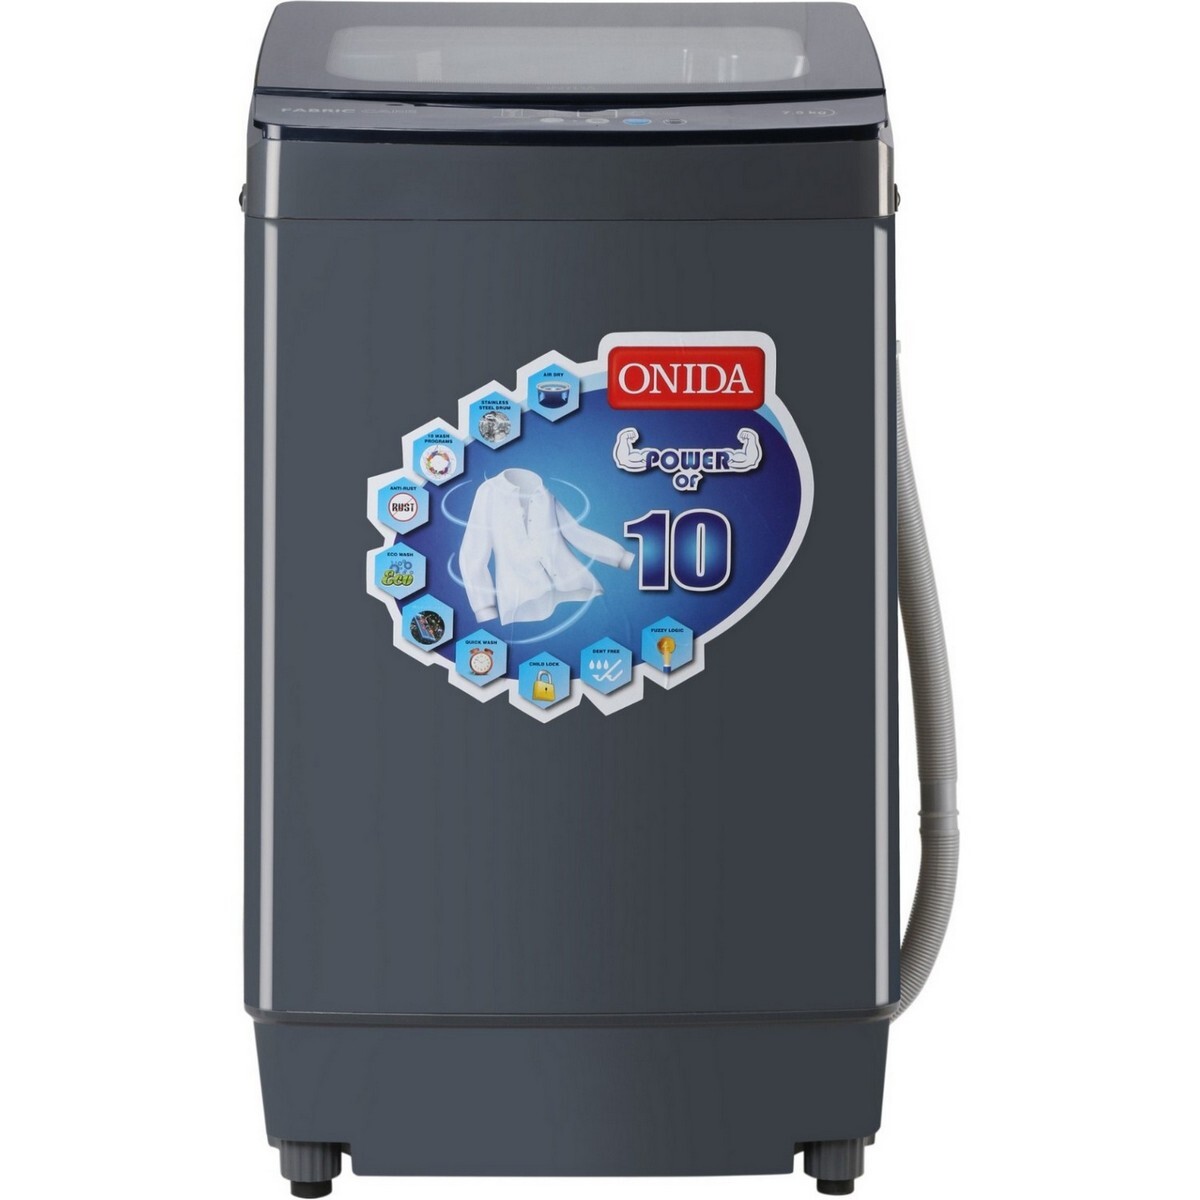 Onida Fully Automatic Top Load Washing Machine T75CGN1 7.5Kg Grey